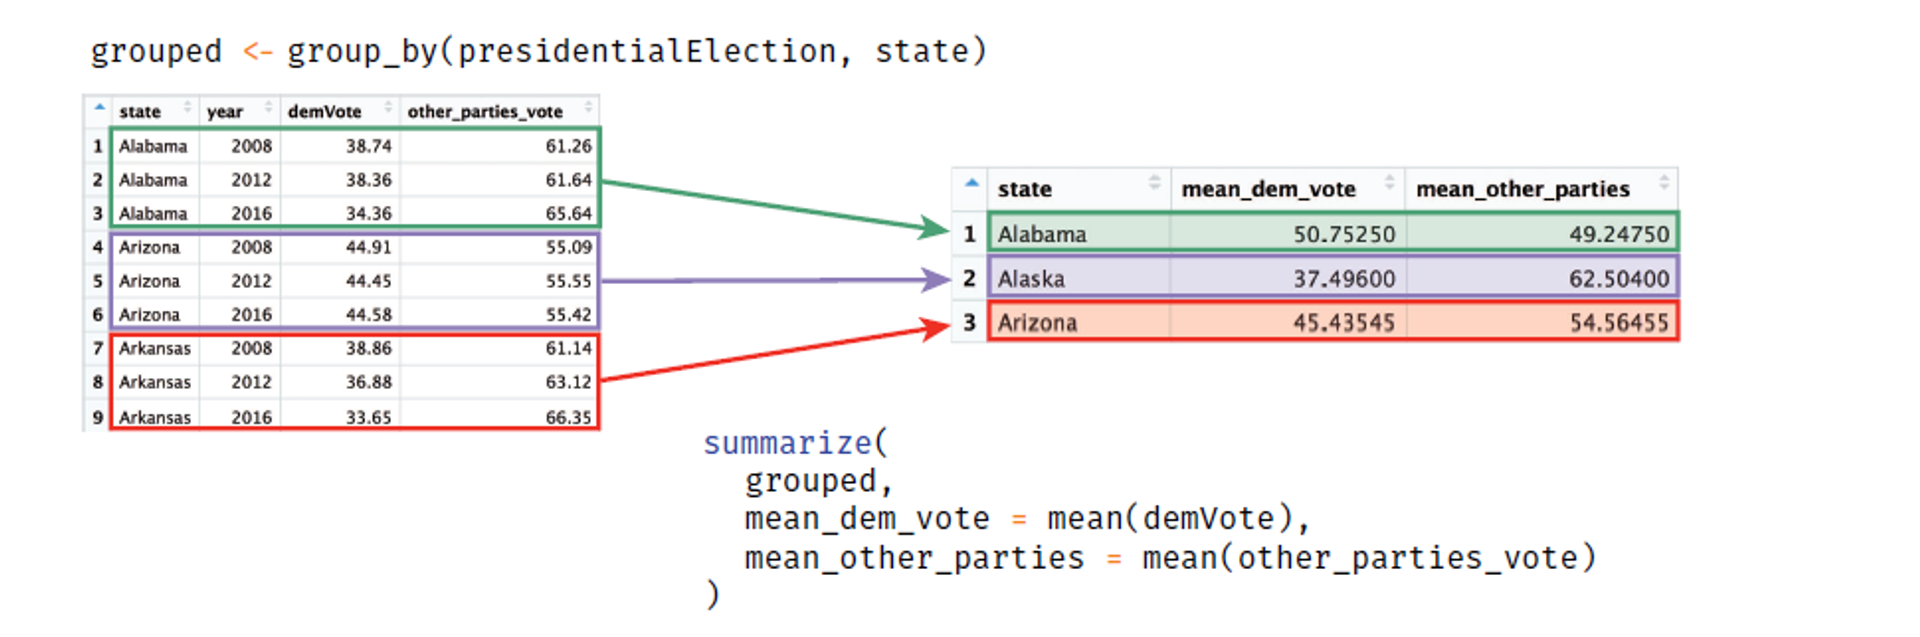 Using the group_by() and summarize() functions to calculate summary statistics in the presidentialElections data frame by state